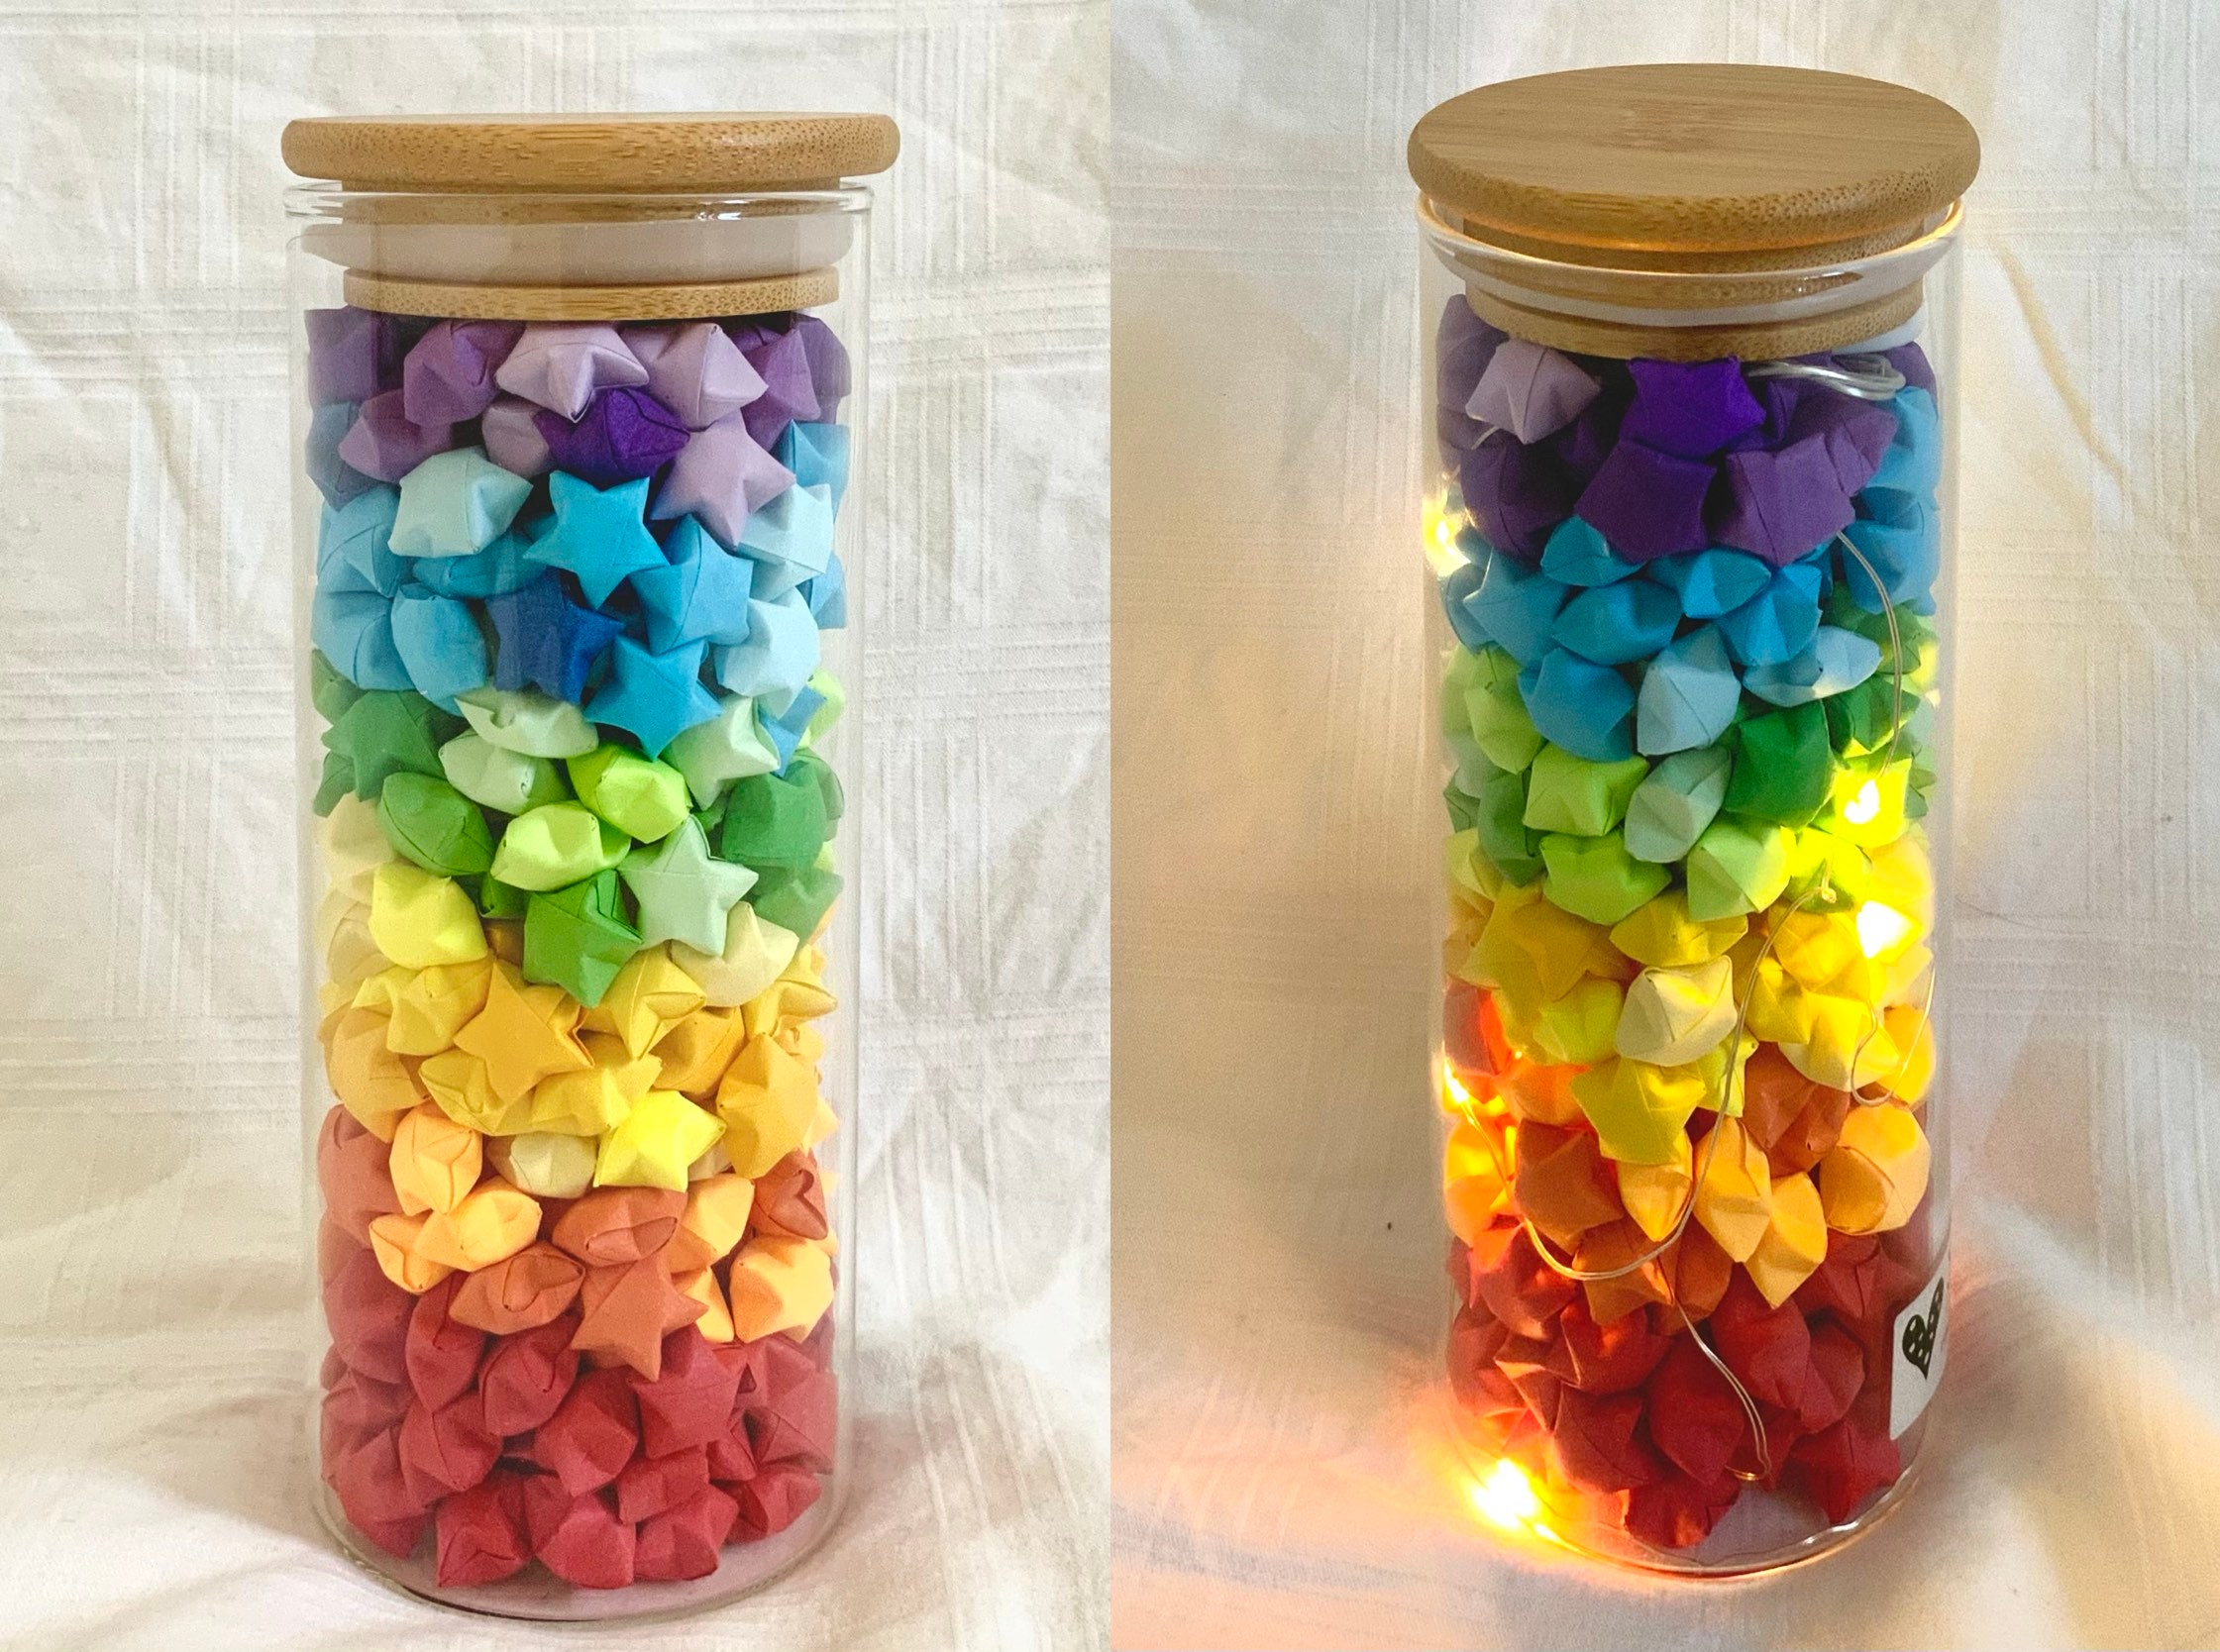 HLZC 350 Pieces Origami Stars Plastic Straw Kit with 2 Pieces Star-Shaped  Transparent Plastic Jars Wishing Bottle